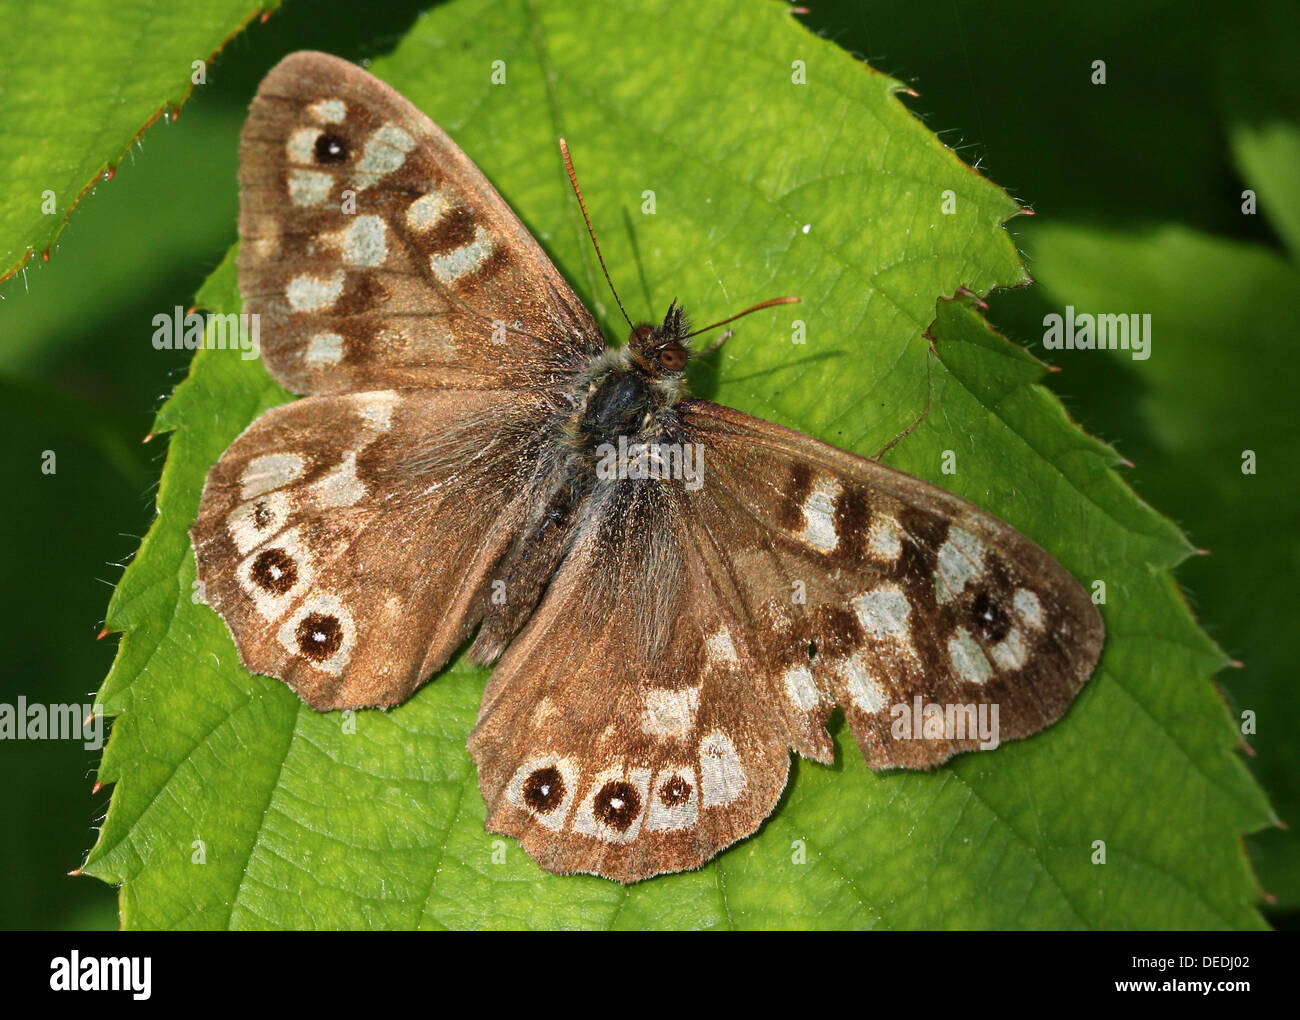 Detailed macro image of a well camouflaged Speckled Wood butterfly  (Pararge aegeria) posing on  a leaf Stock Photo